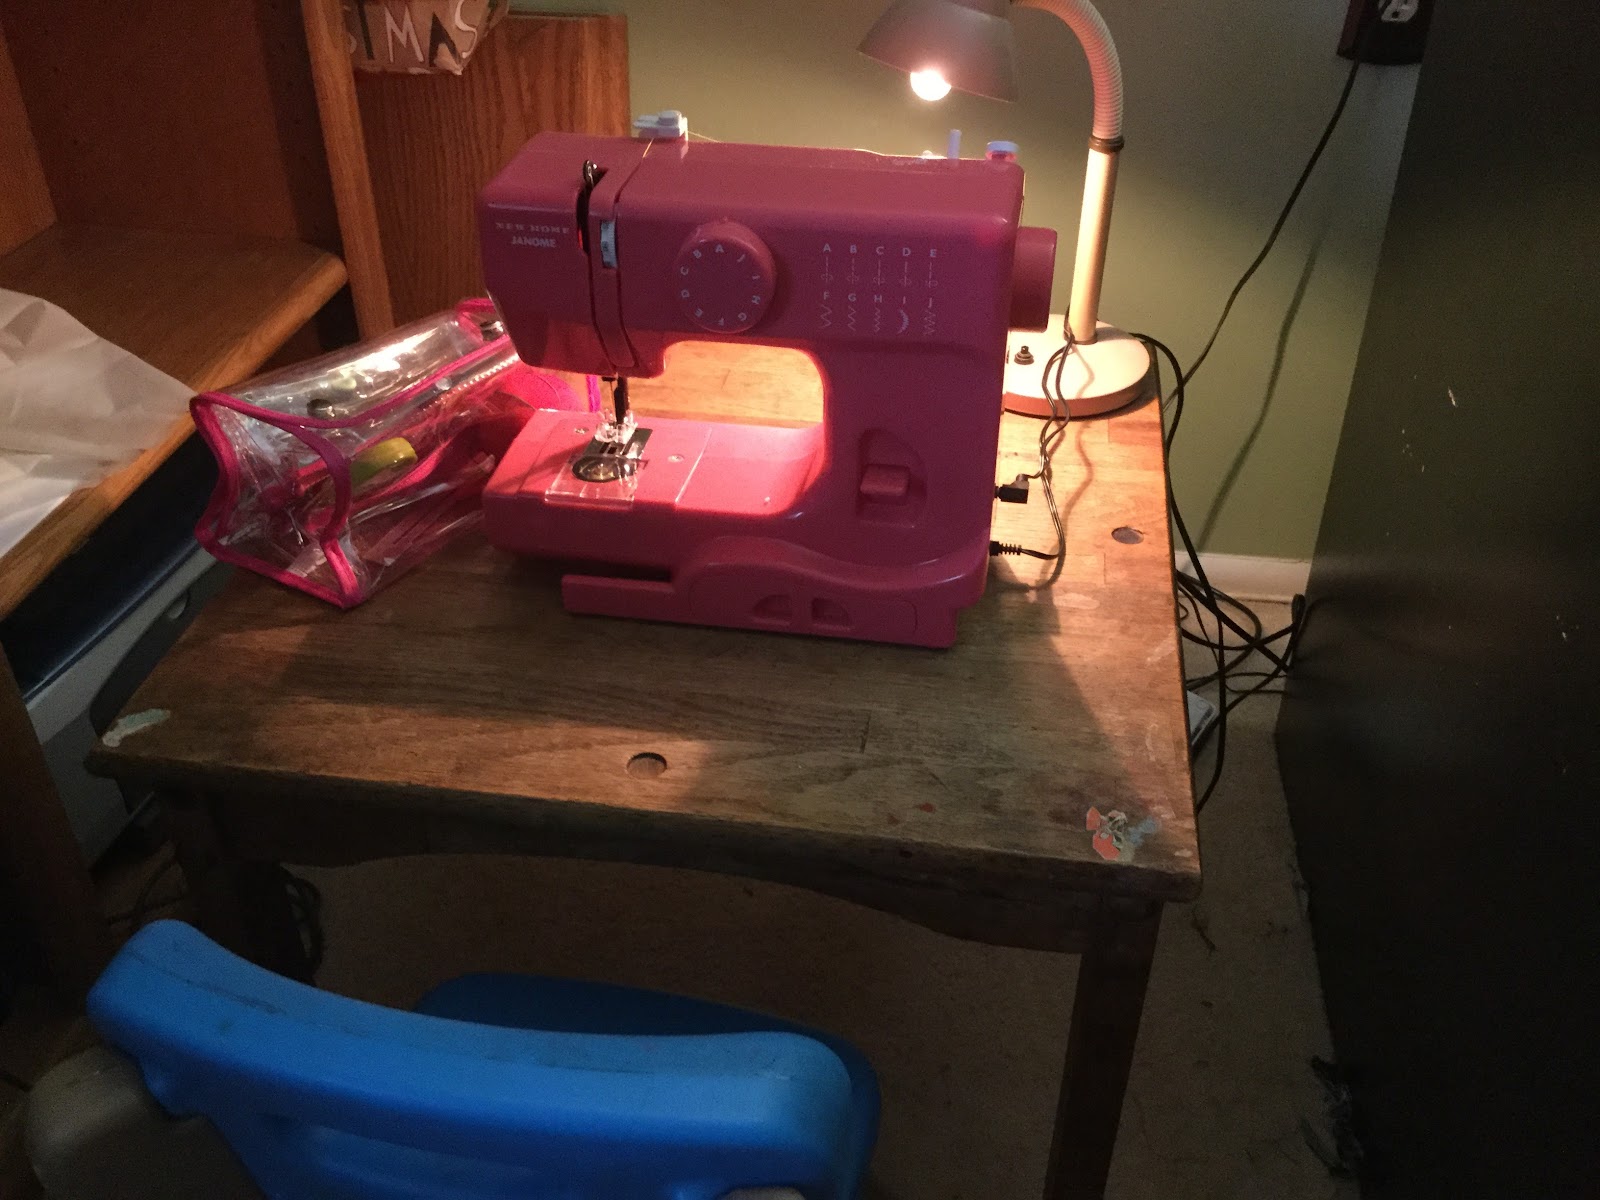 110 Creations: Kids Can Sew! A New Sewing Machine